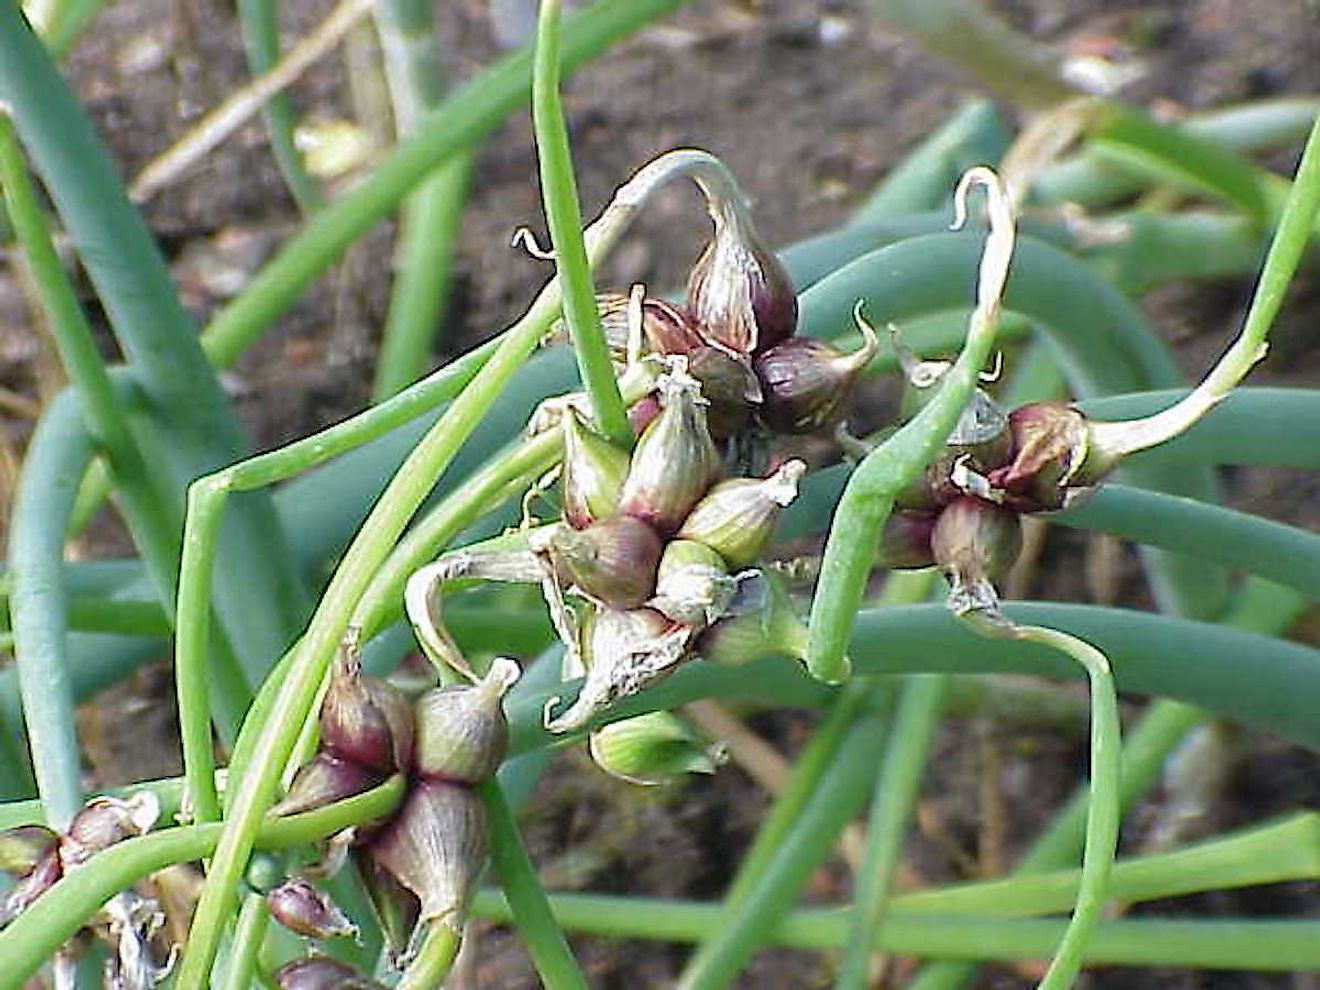 Tree onions" form clusters of small bulbs instead of flowers. Image credit: Kurt Stüber/Wikimedia.org